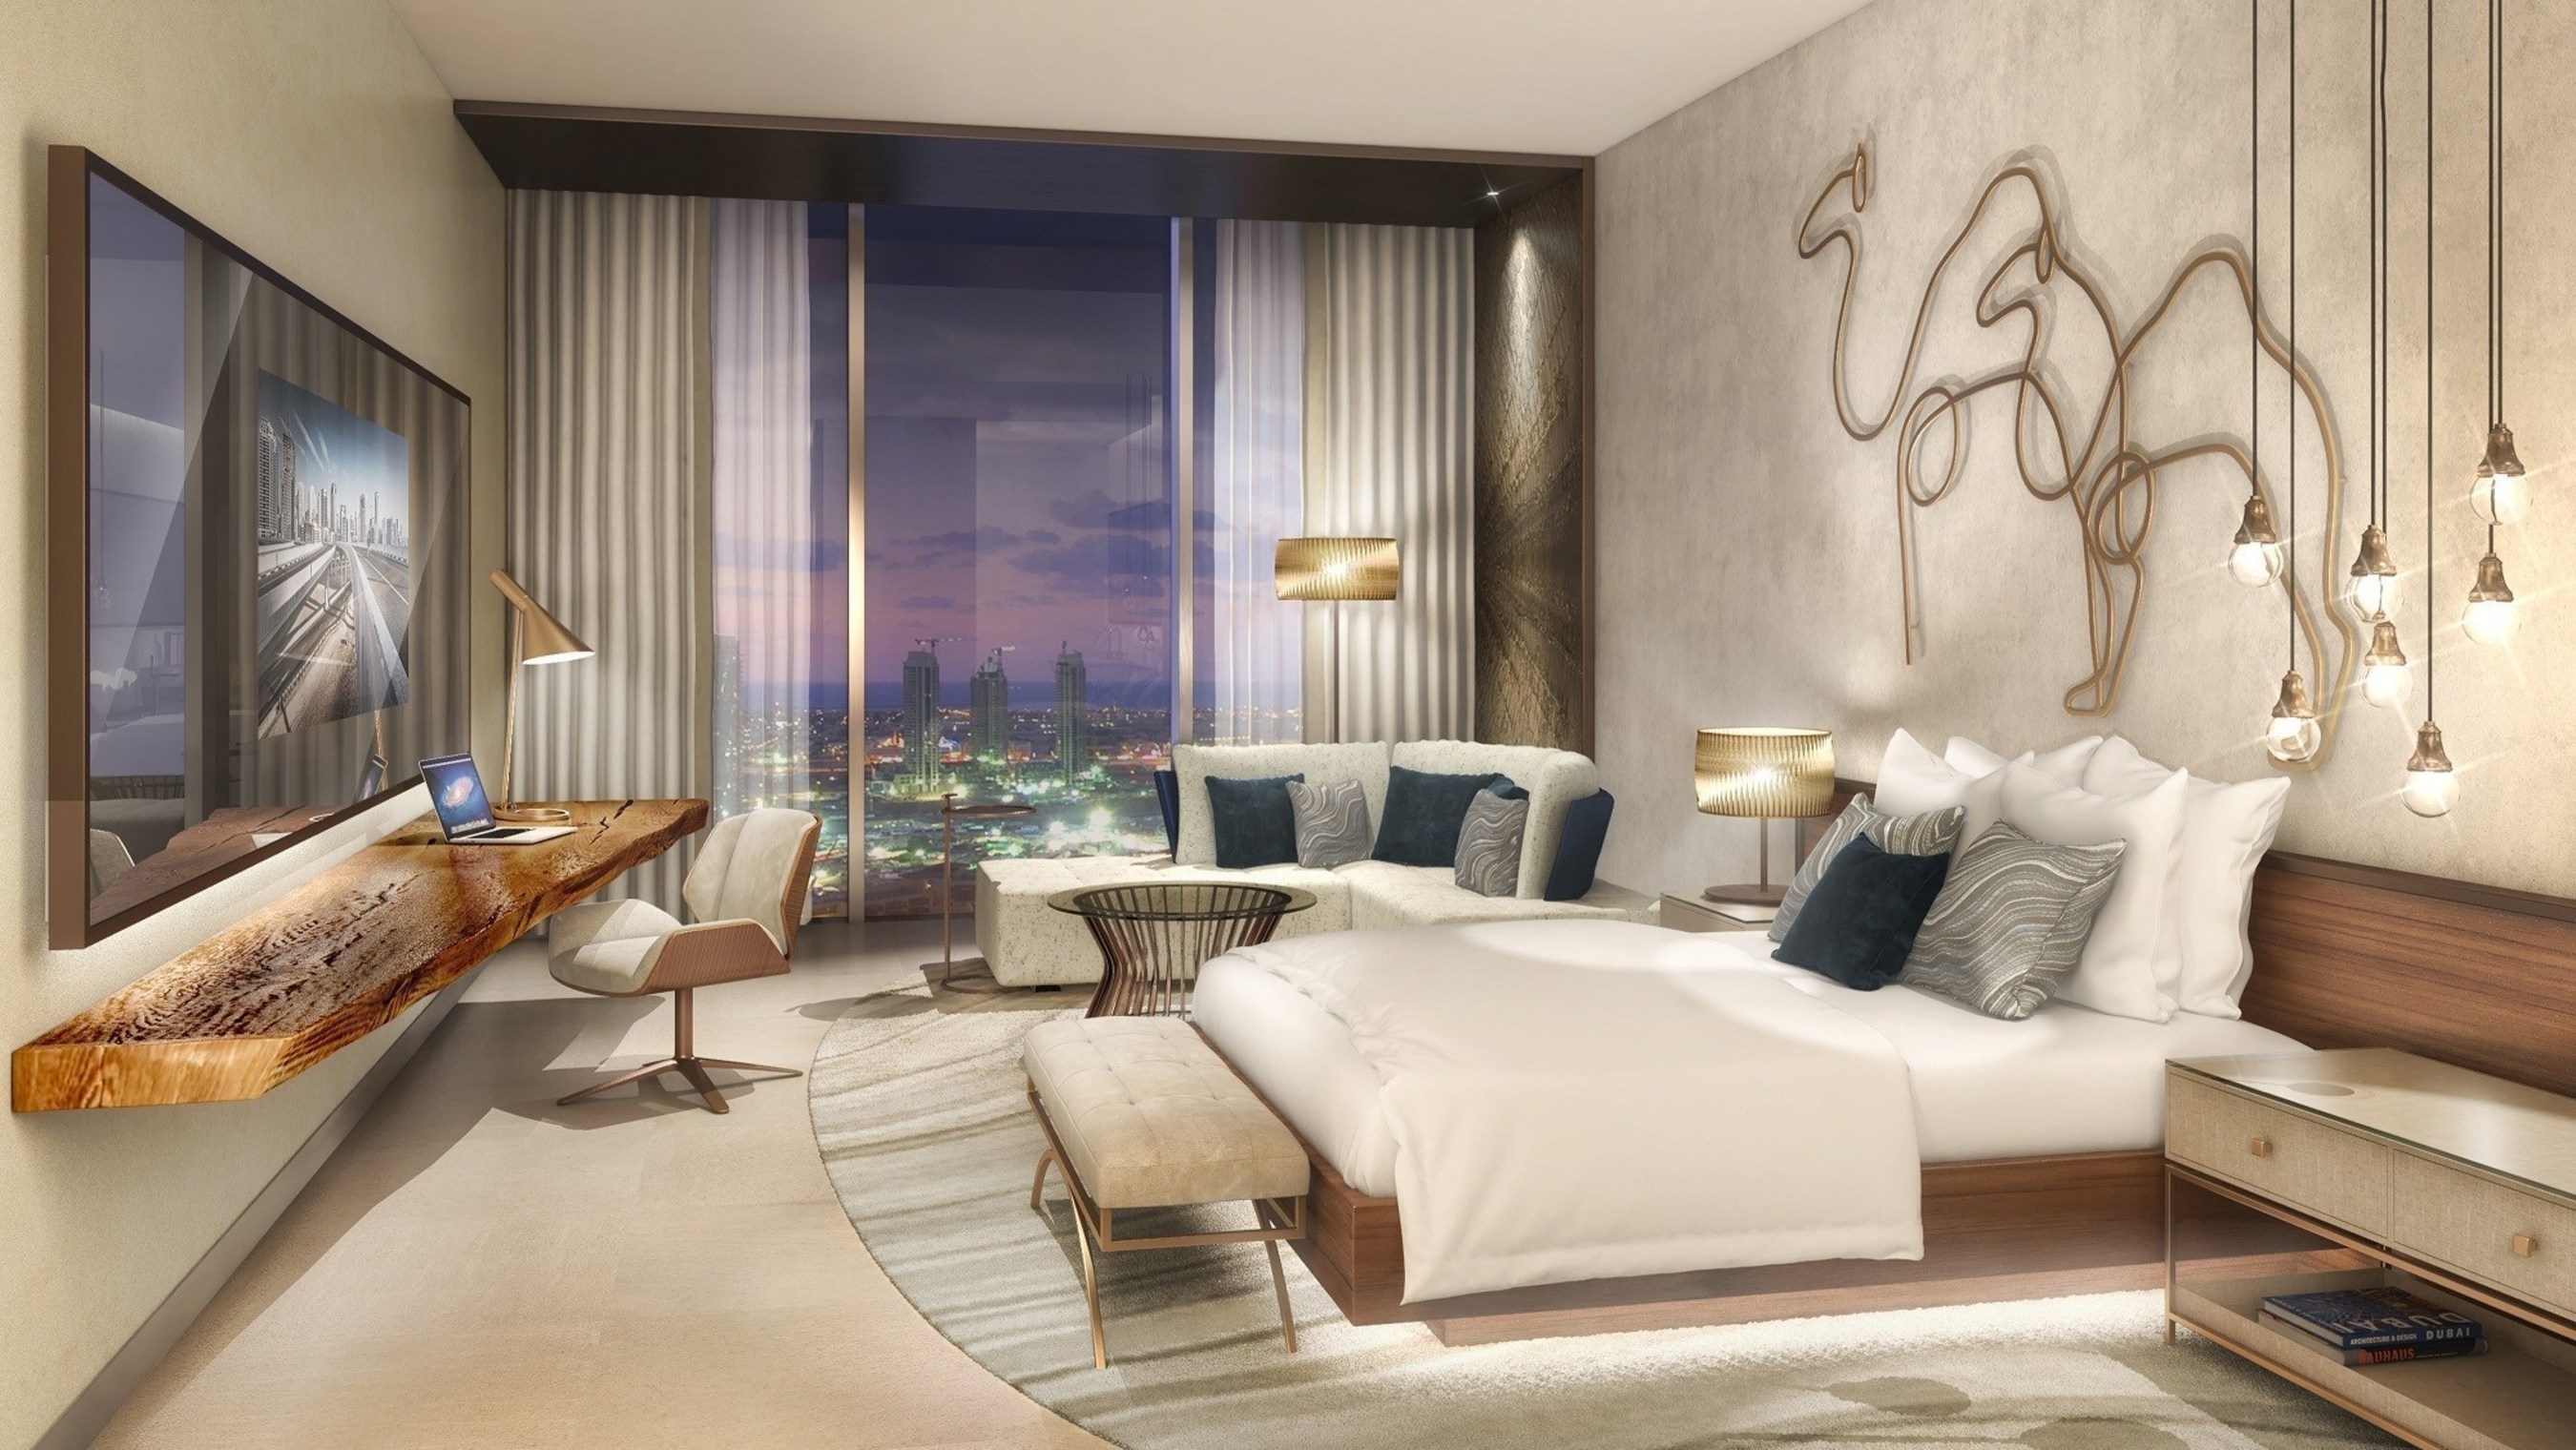 Marriott International Set to Open the First Renaissance Hotel in Dubai at the end of 2016.